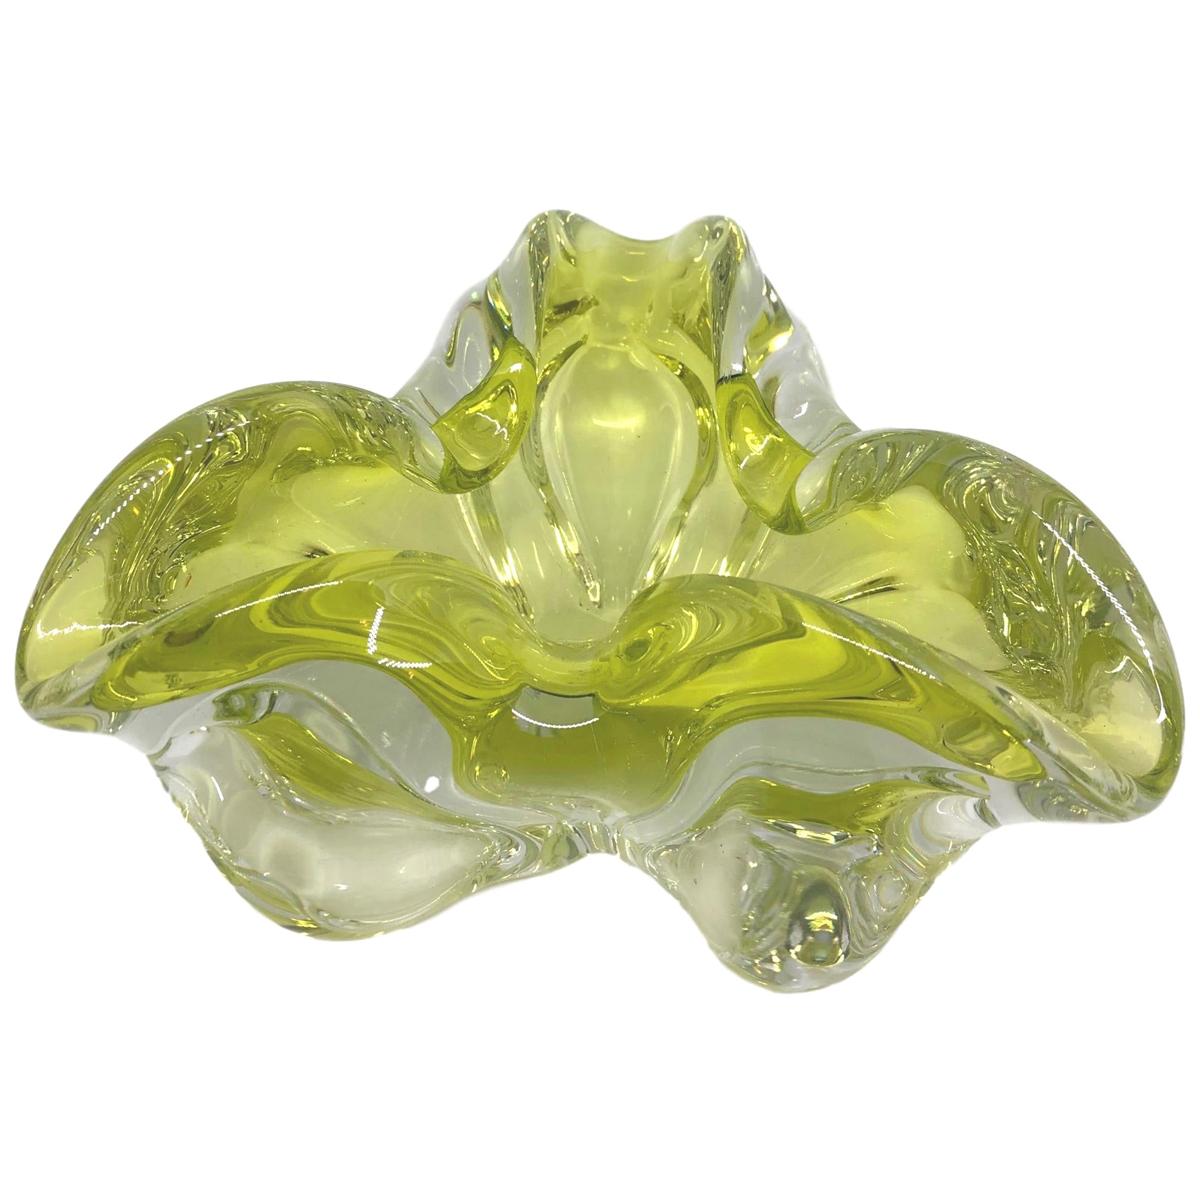 Murano Art Glass Lime Green and Clear Bowl Catchall Italy, Sommerso, 1970s